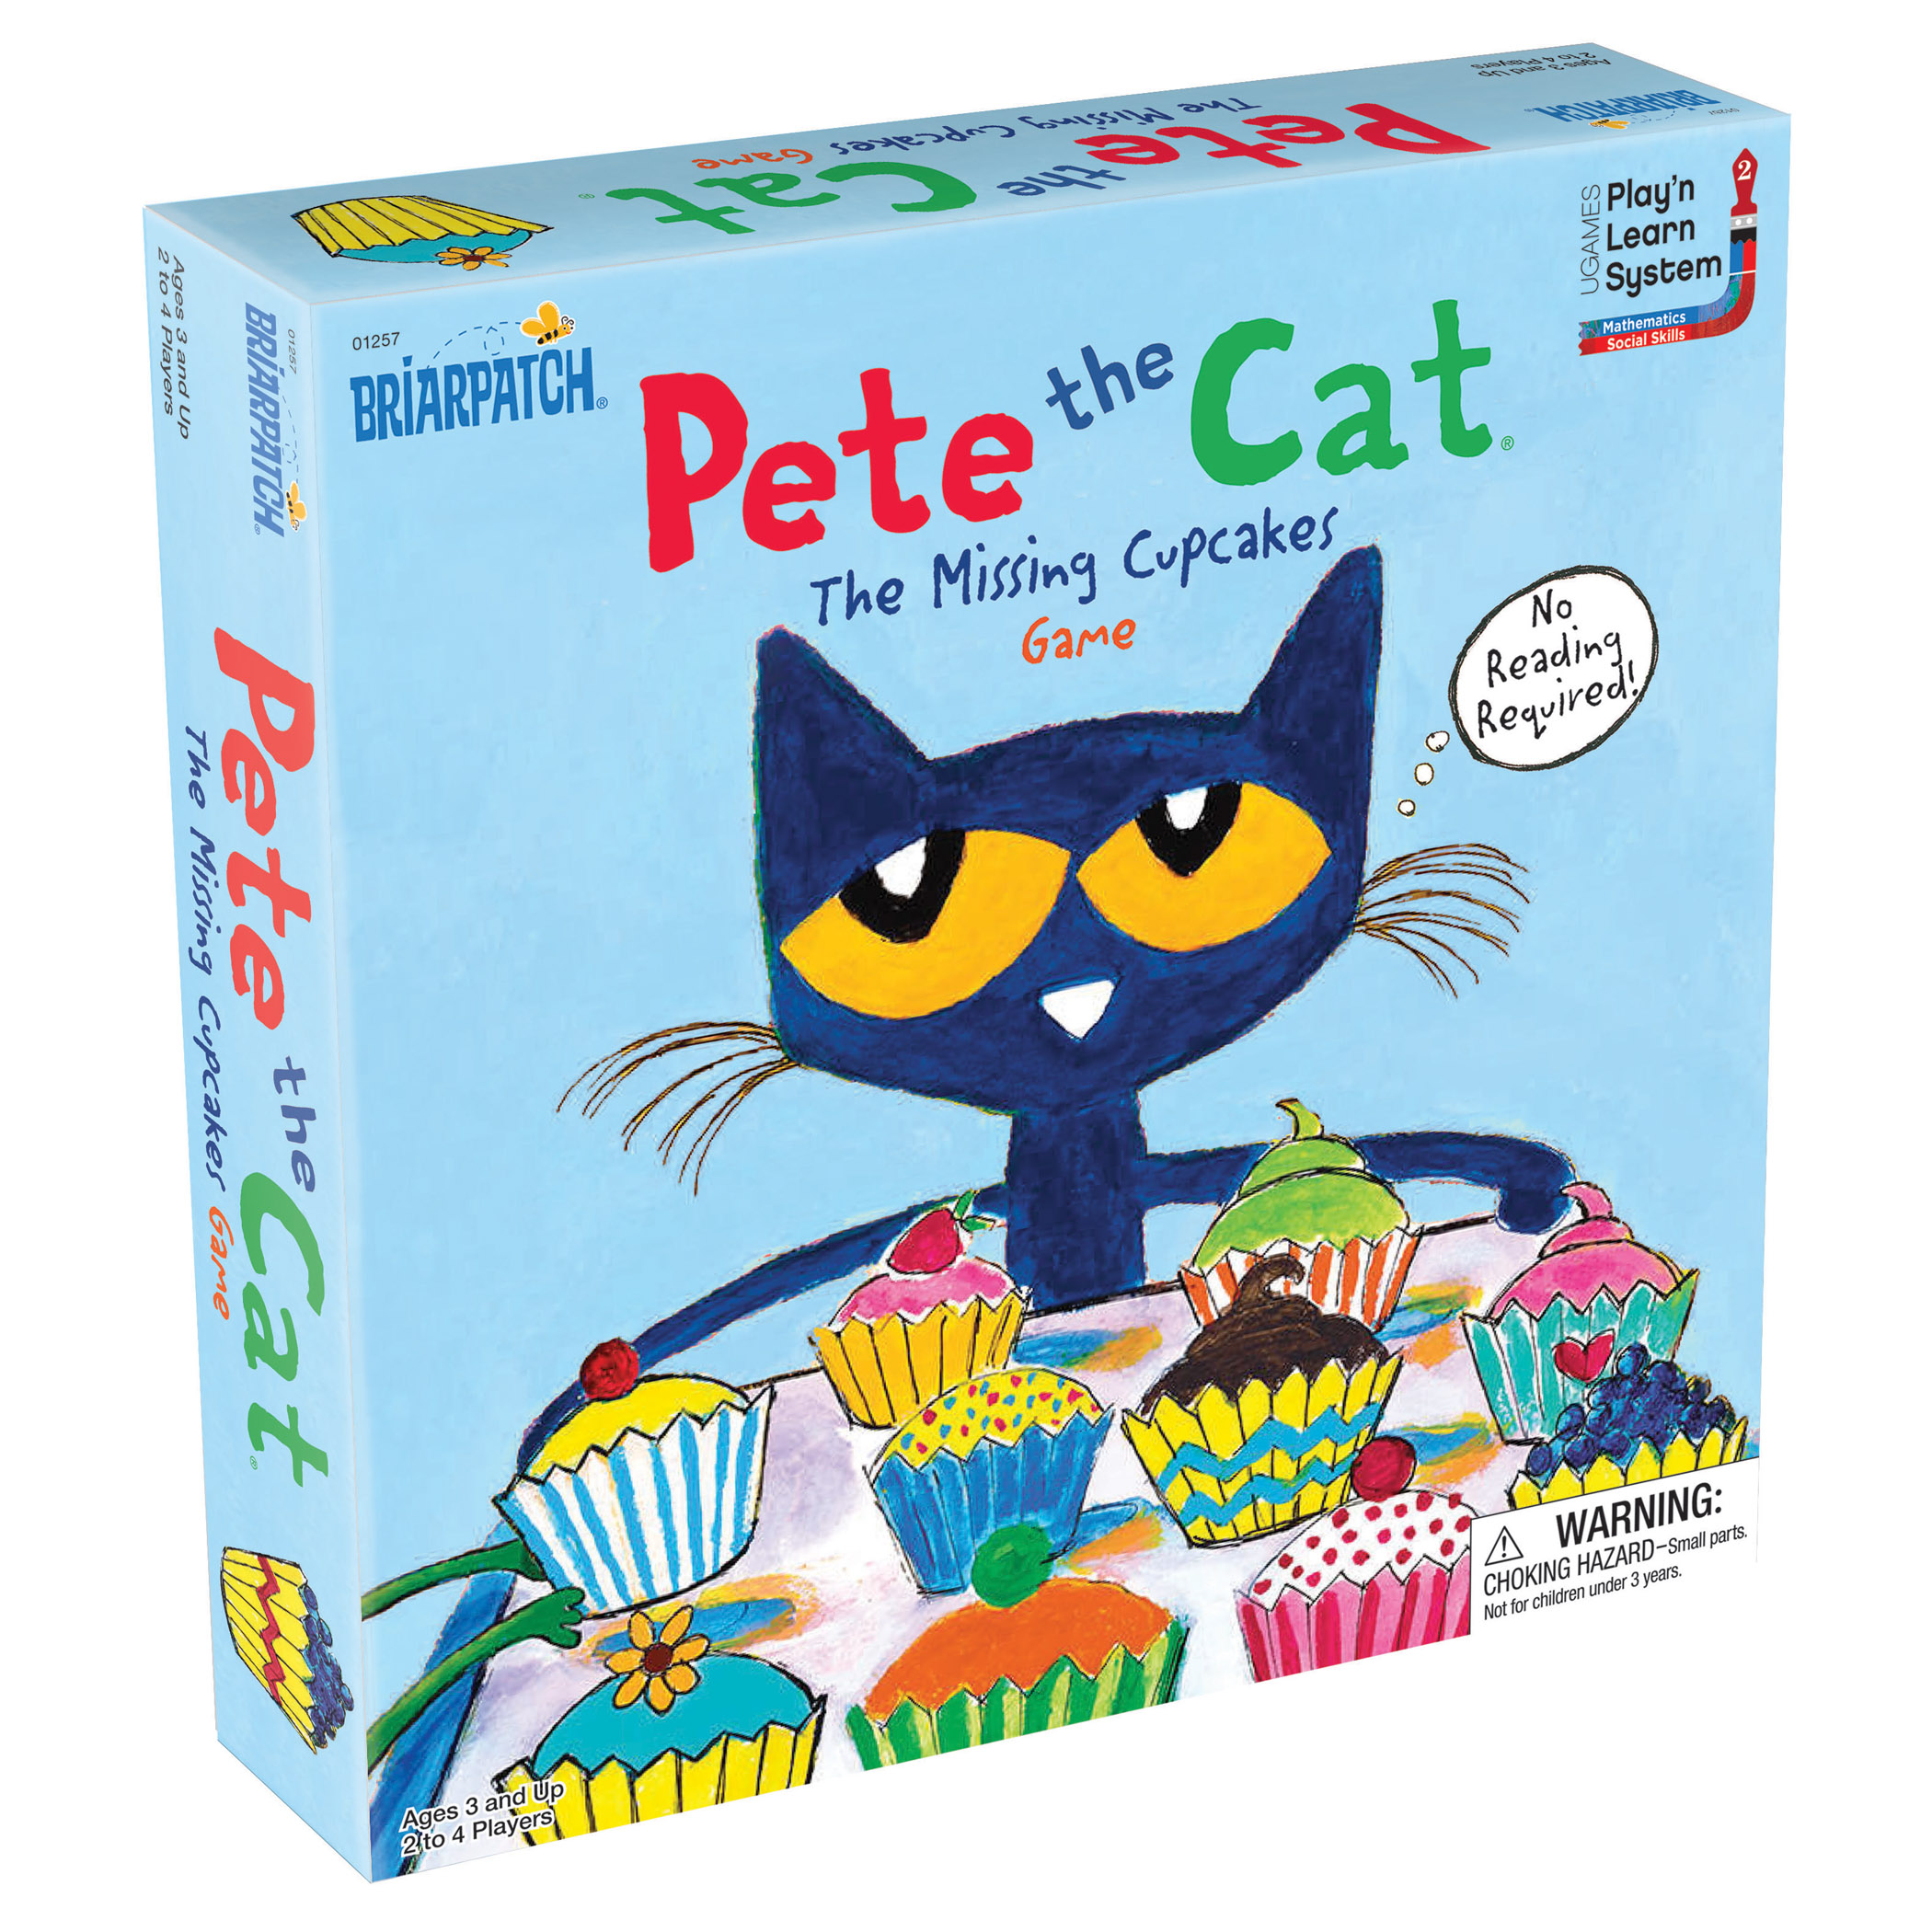 Briarpatch Pete the Cat The Missing Cupcakes Game